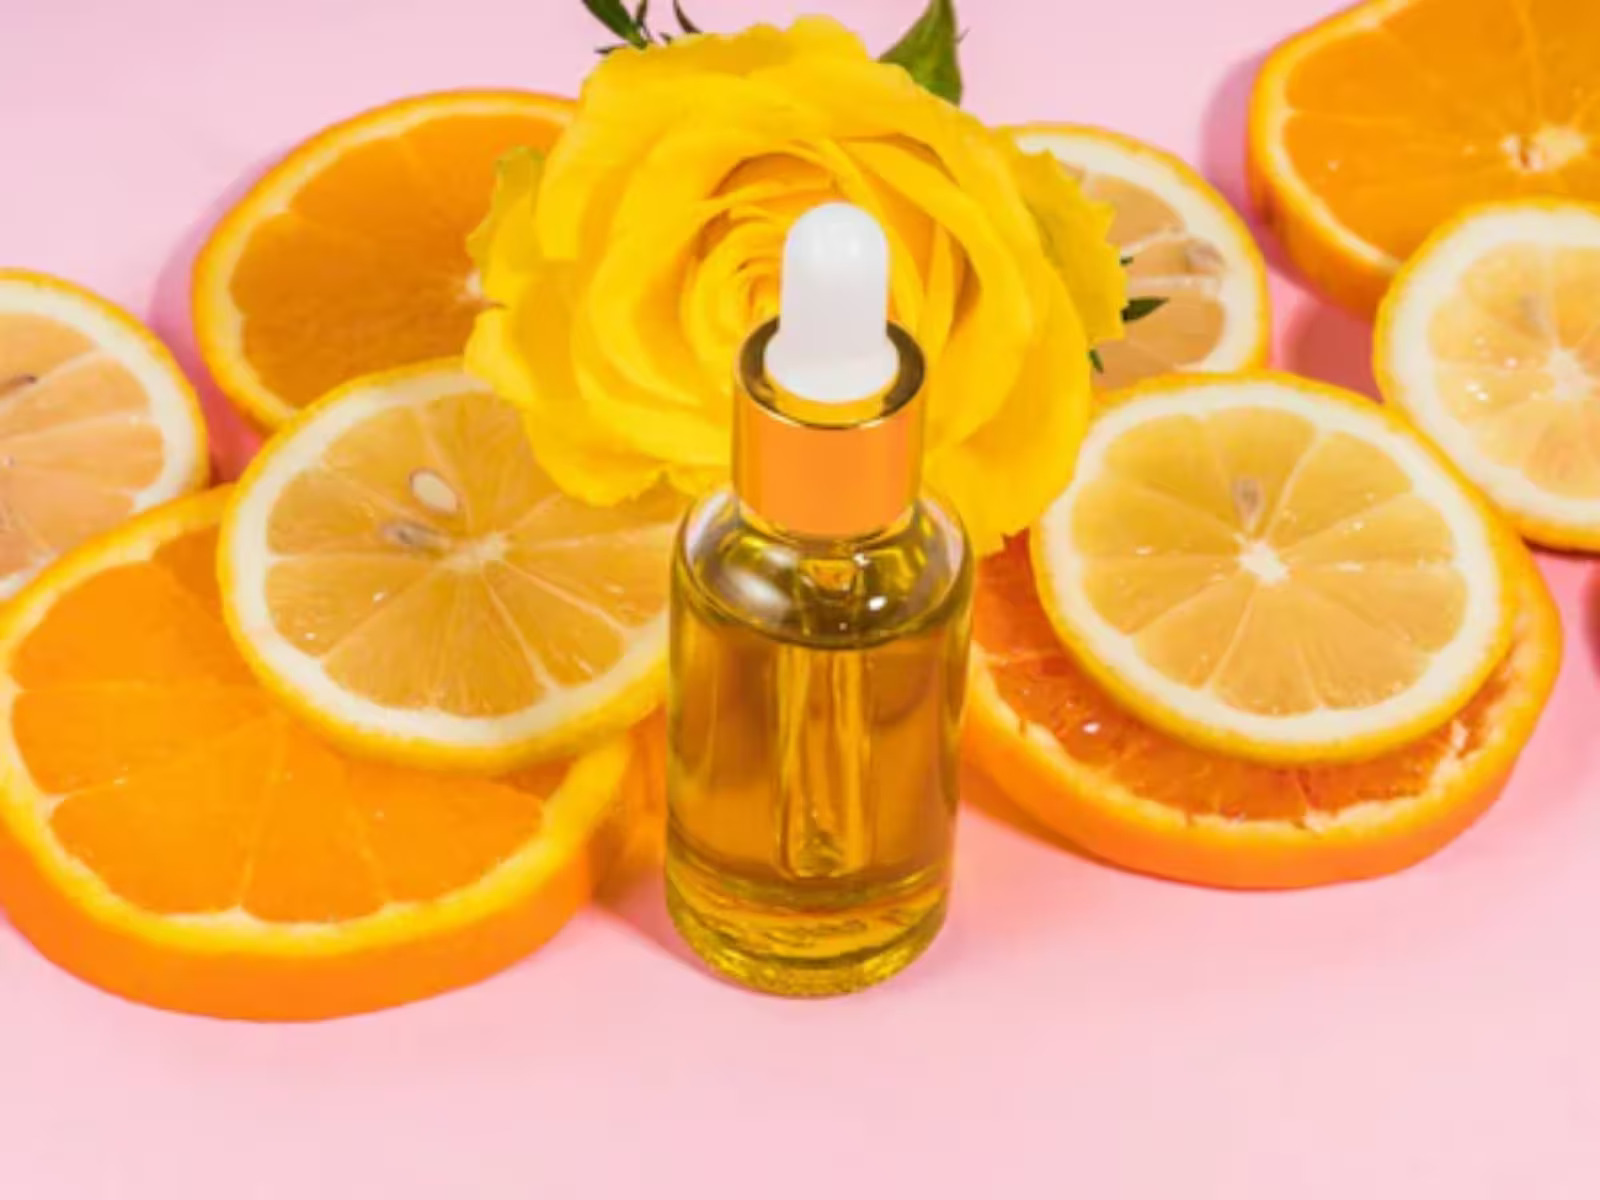 “Get Rid of Oily Skin with the Help of Vitamin C Serum”